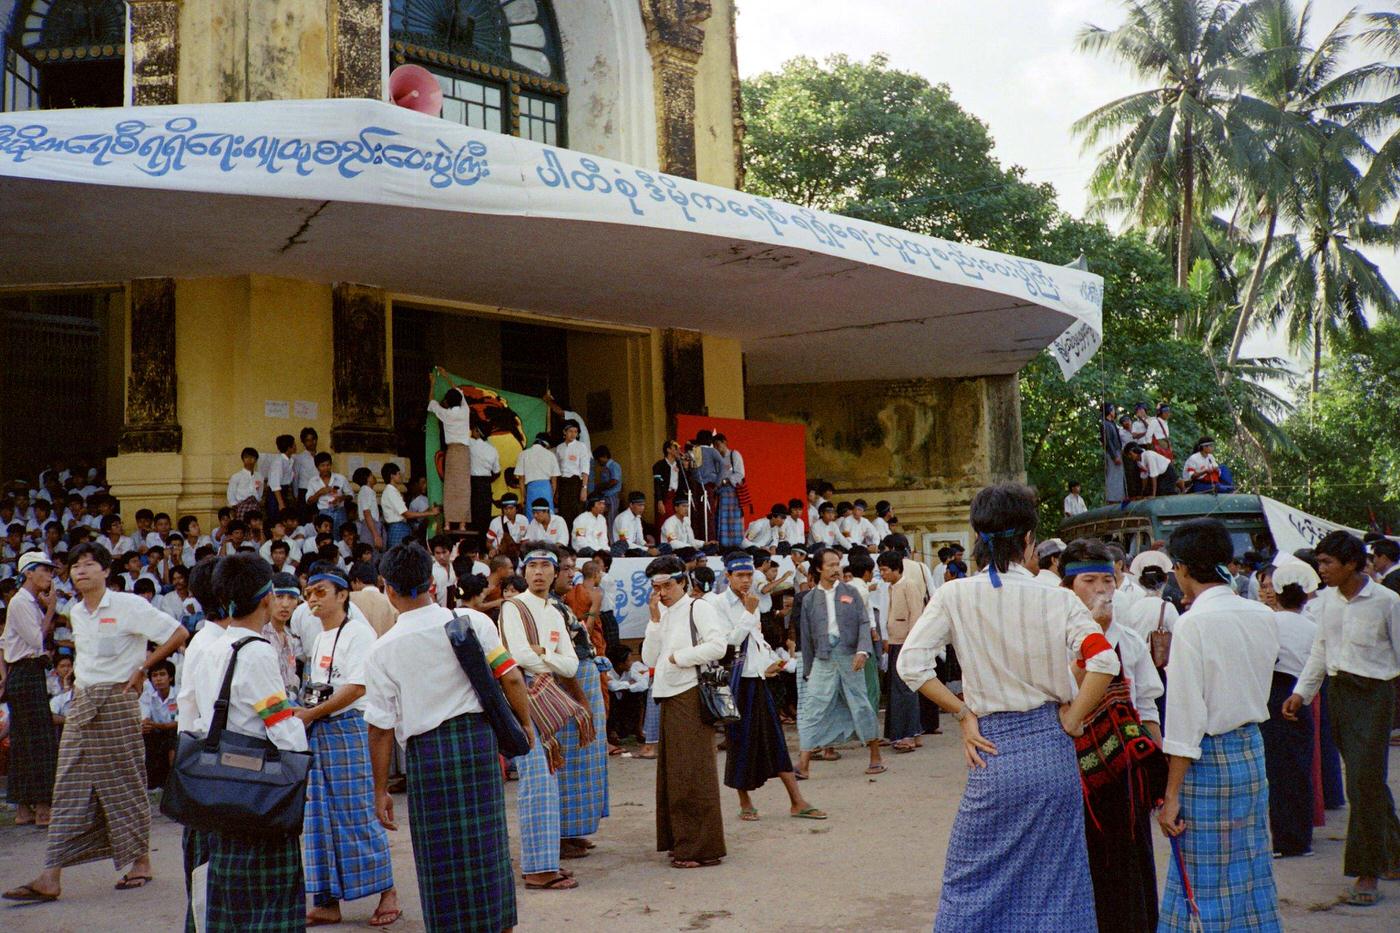 Anti-government protestors march in Rangoon demanding multi-party rule during the 8888 Uprising, 1988.